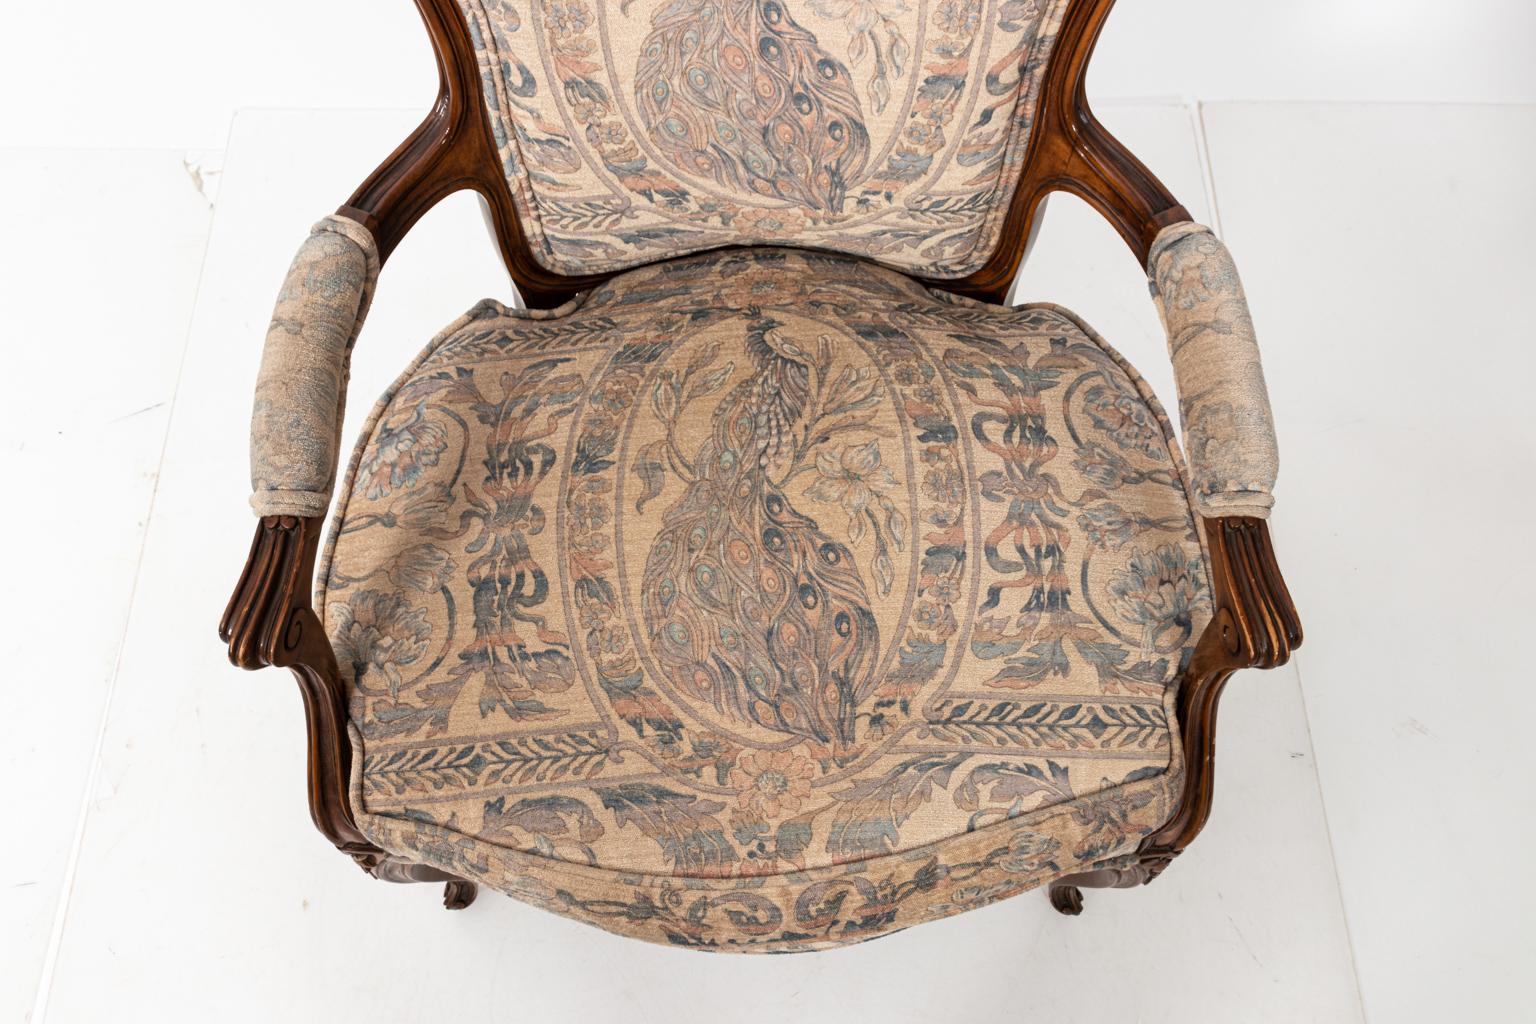 Pair of French Rococo style carved wood armchairs with peacock upholstery, circa 1970s. The piece also features carved floral details and cabriole legs. Made in the United States. Please note of wear consistent with age including chips and finish